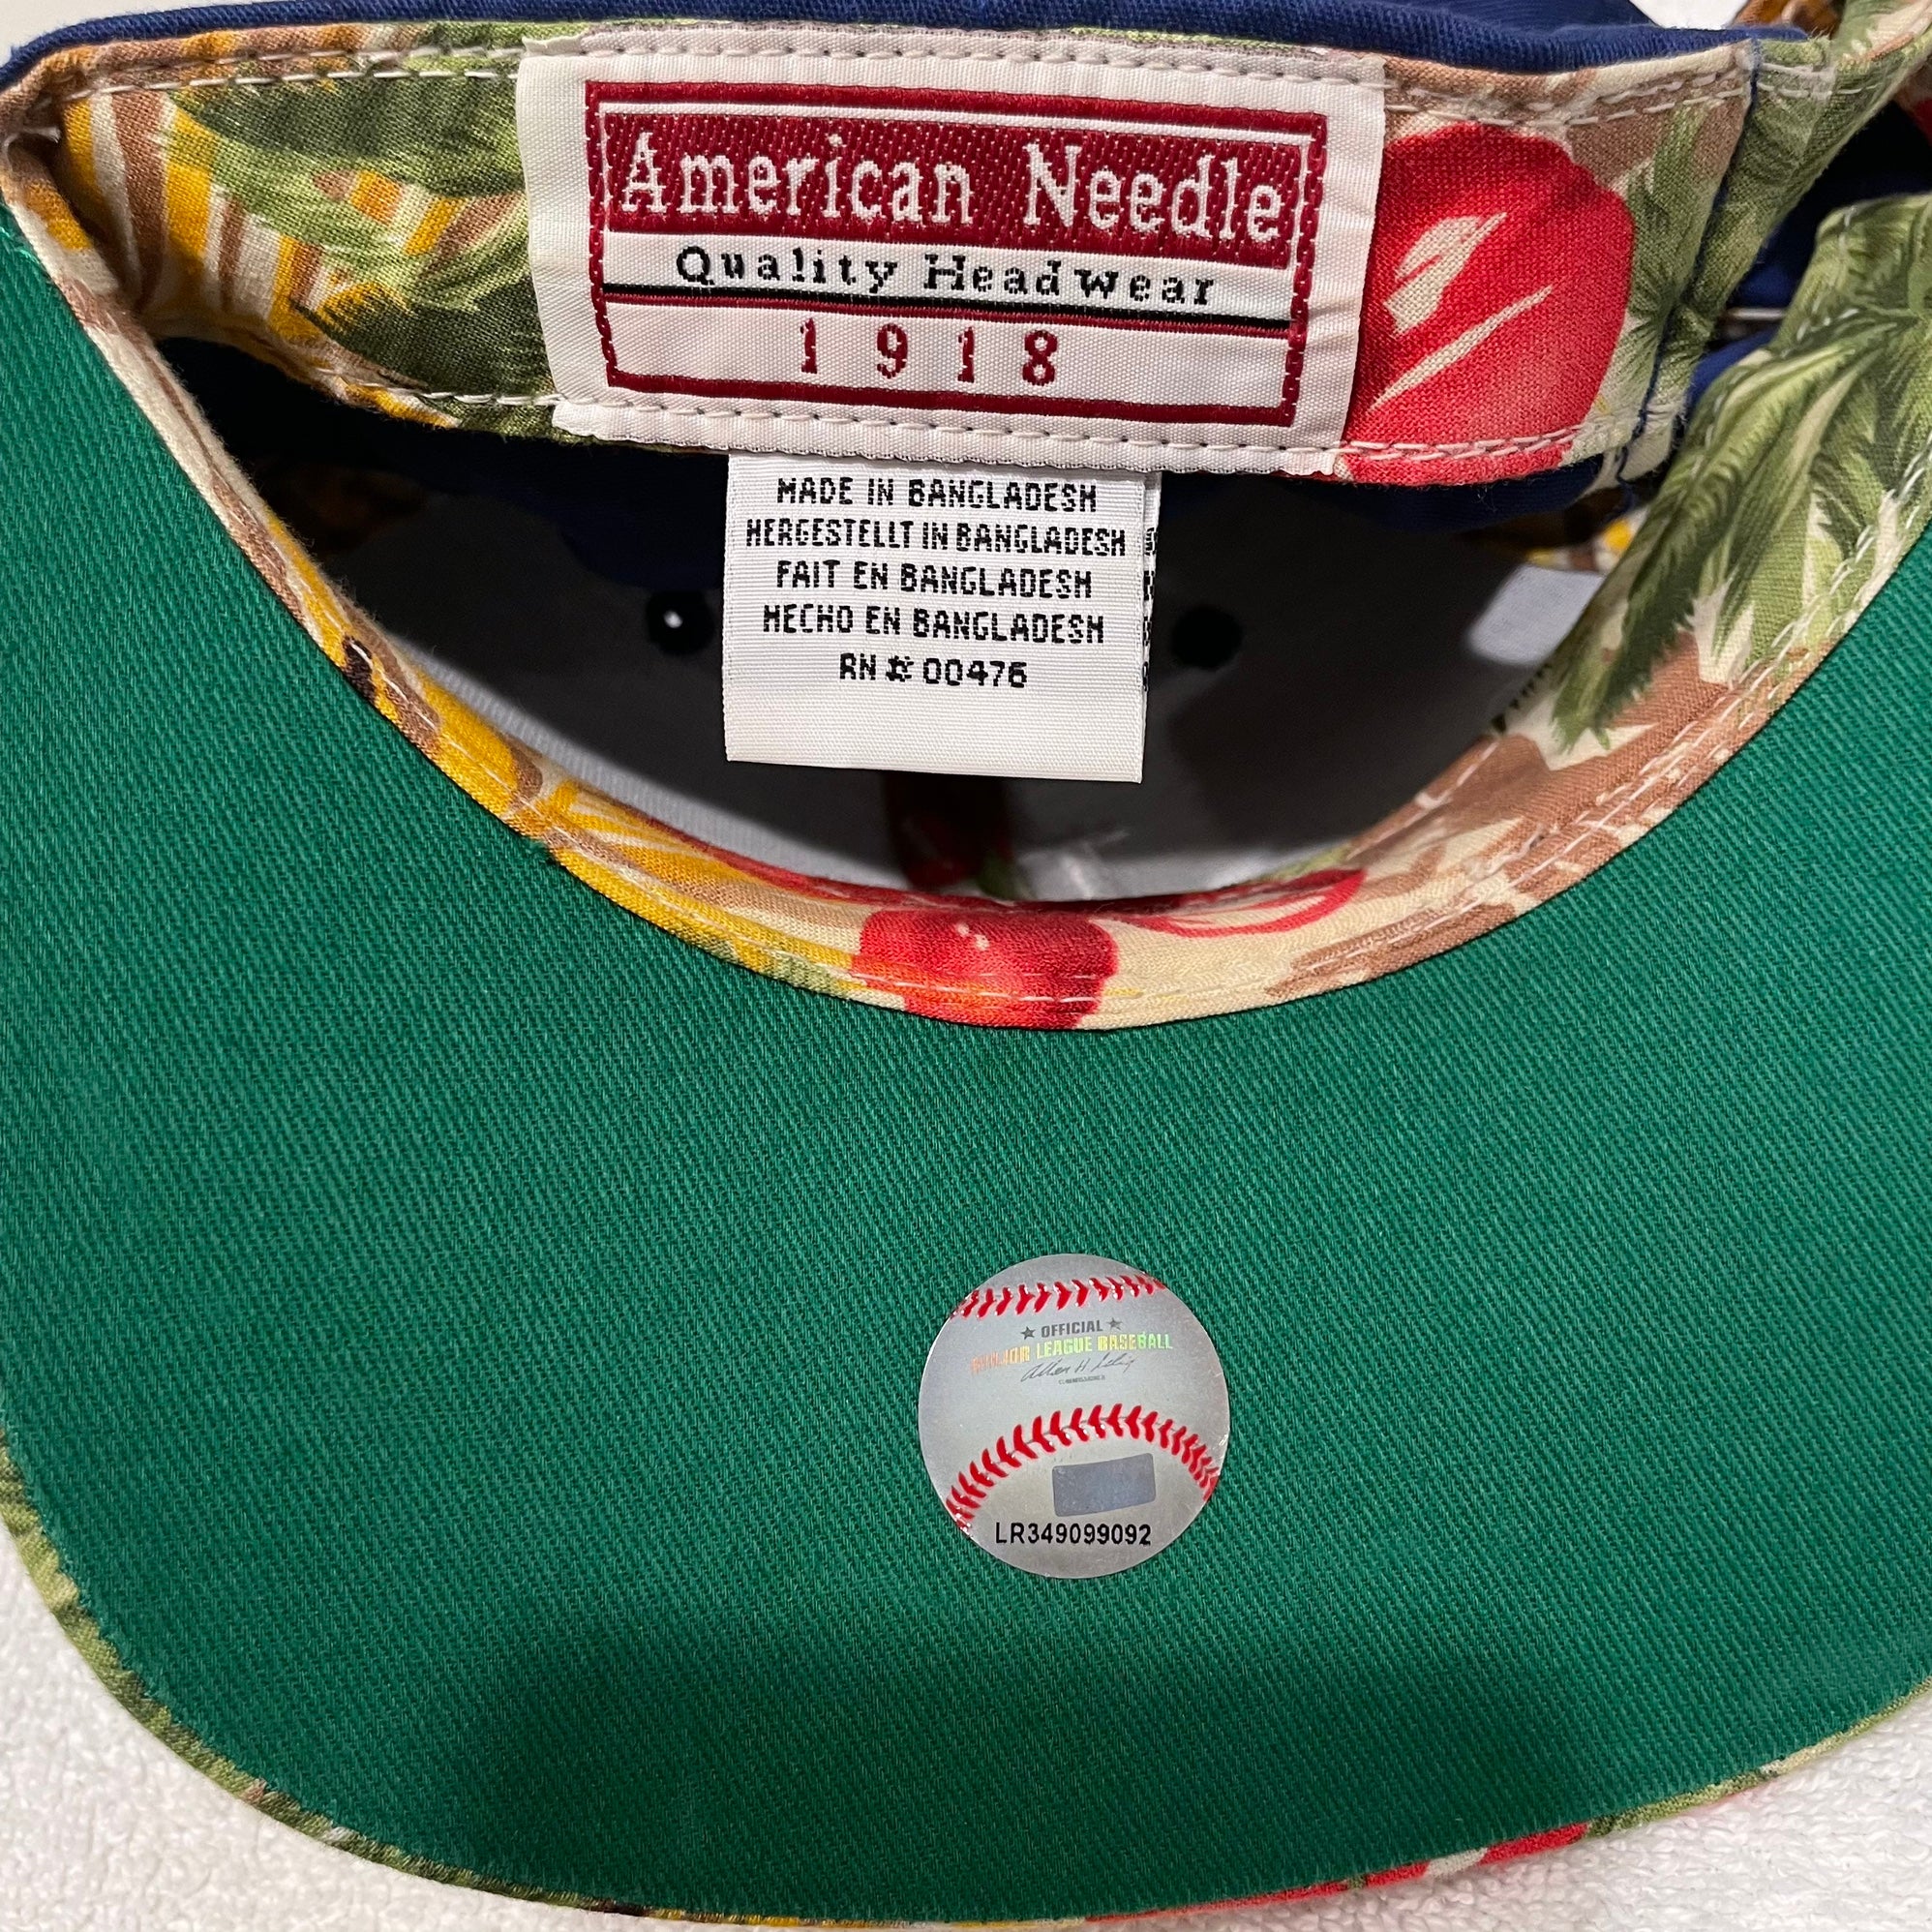 Vintage Cooperstown Collection/American Needle MLB Baseball Hats - 7 1 –  Put This On